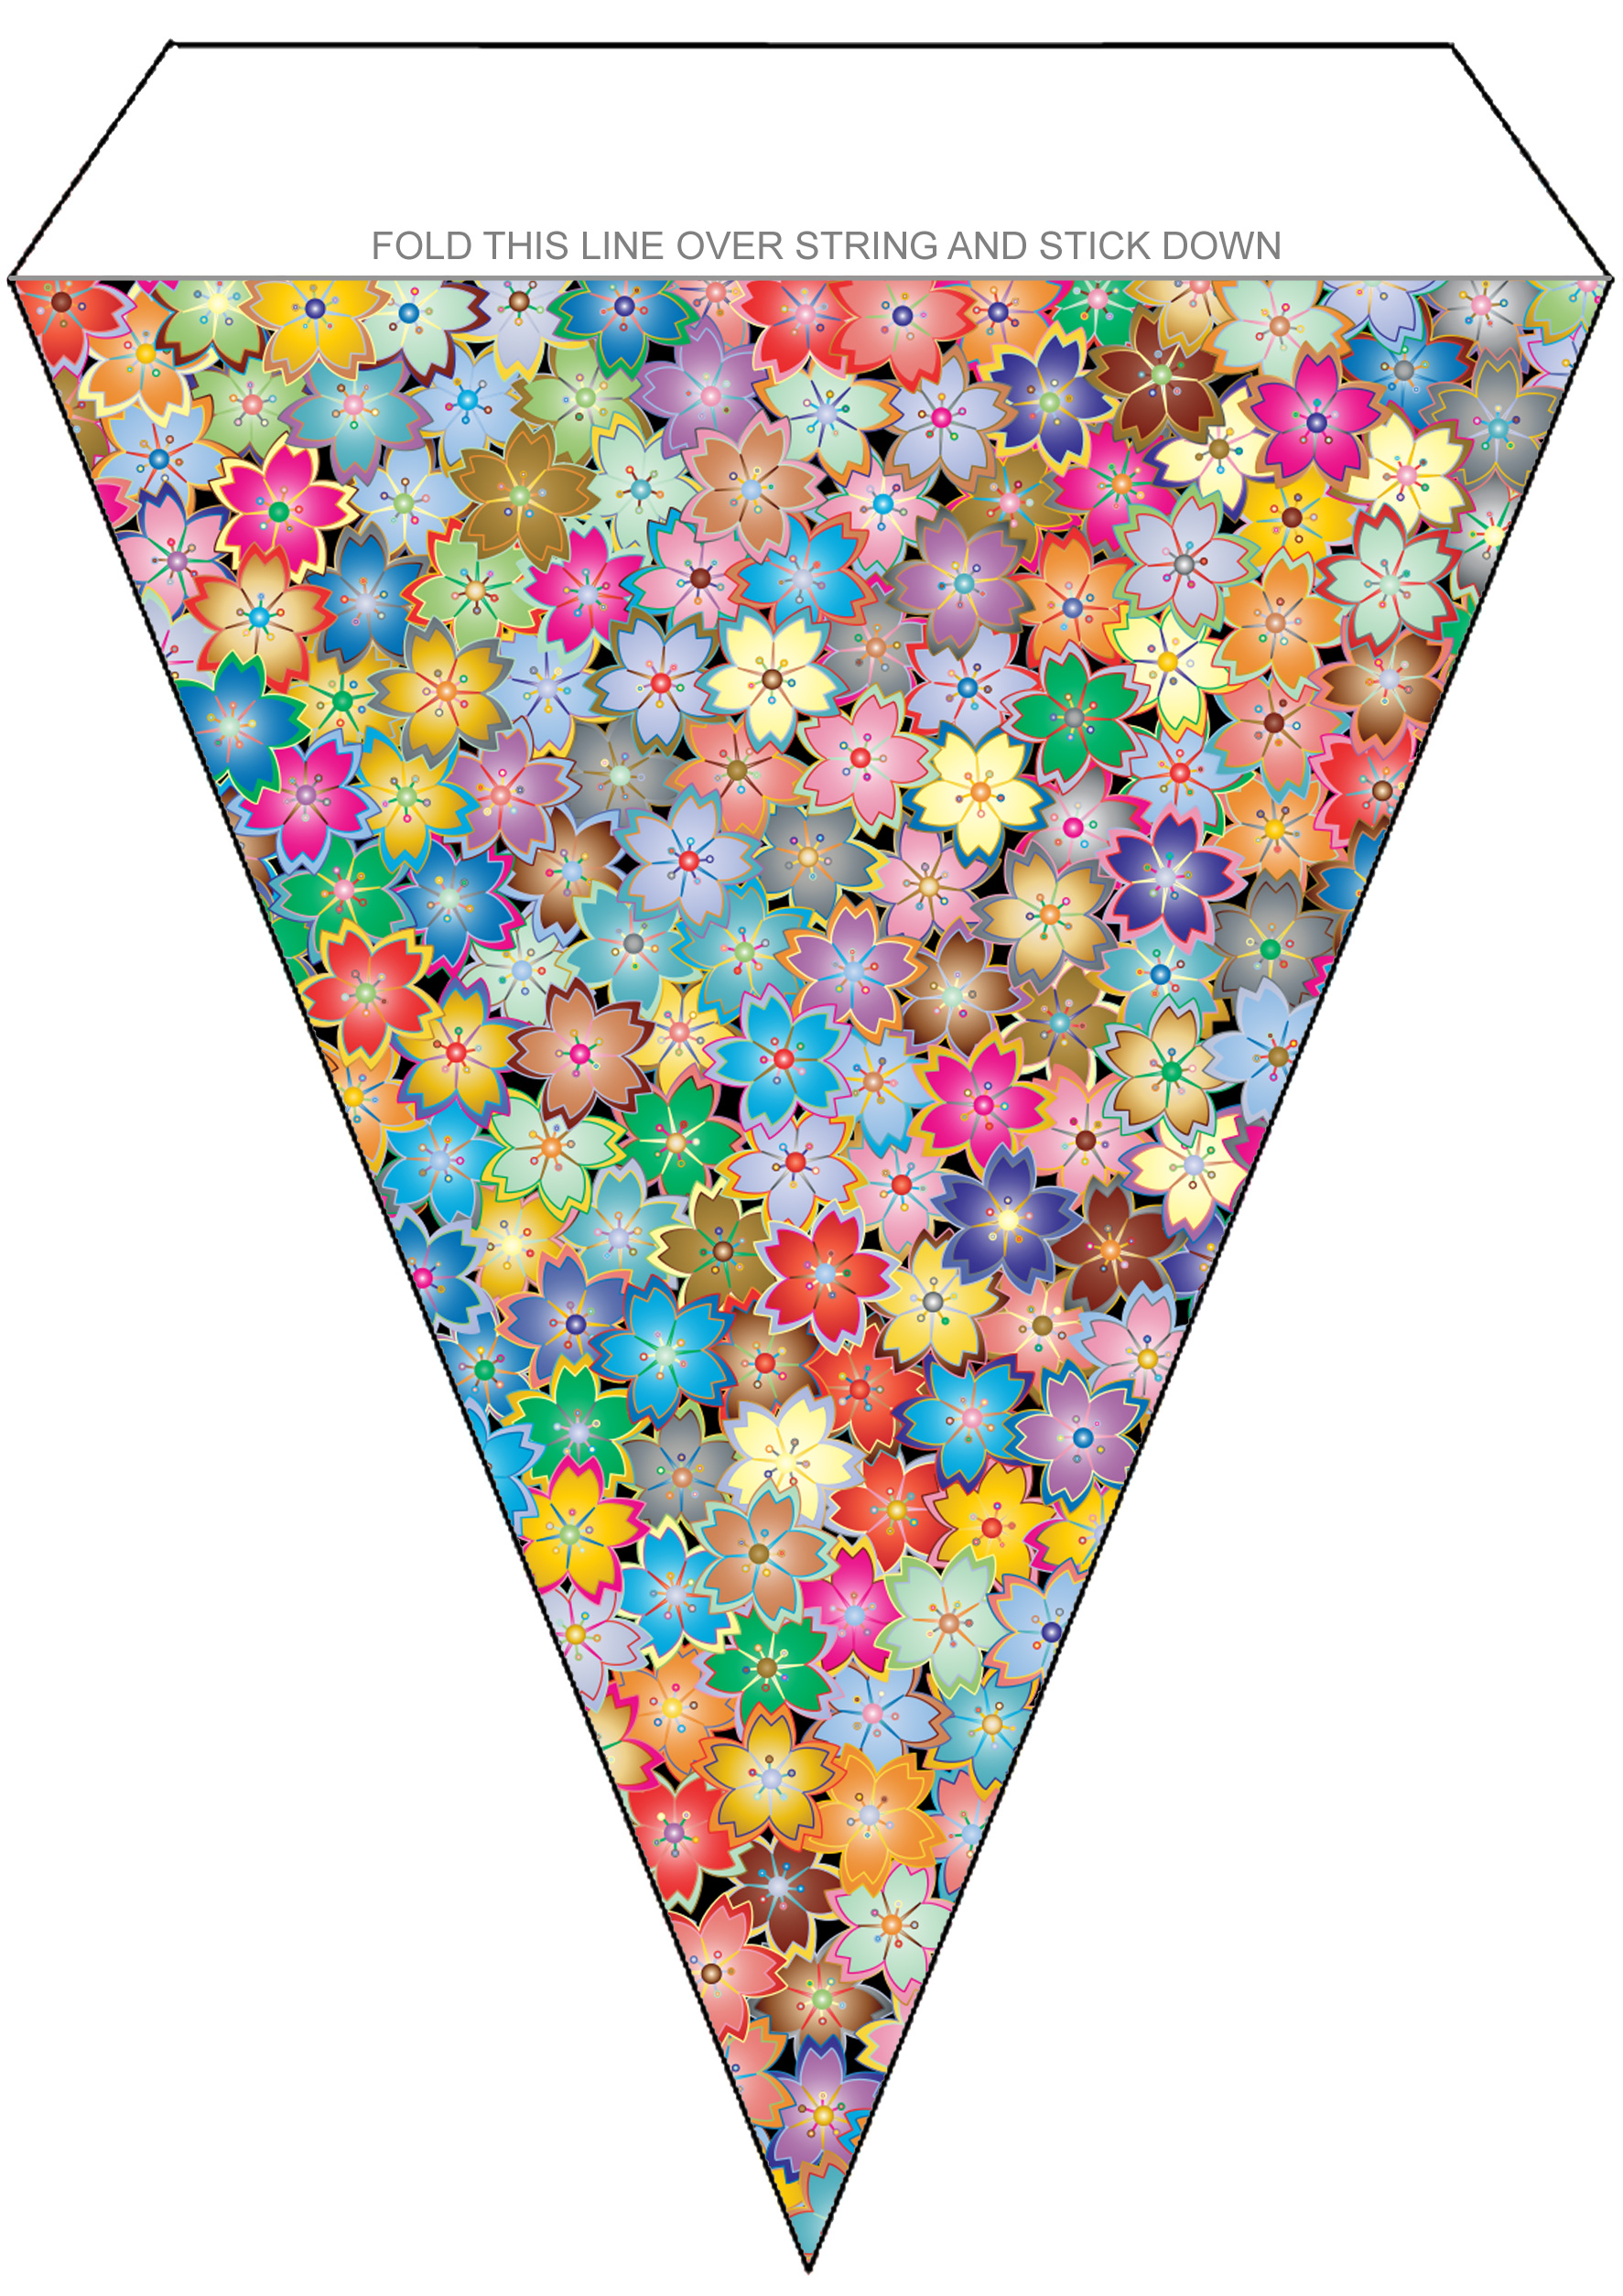 Flowery bunting to print and decorate your home.